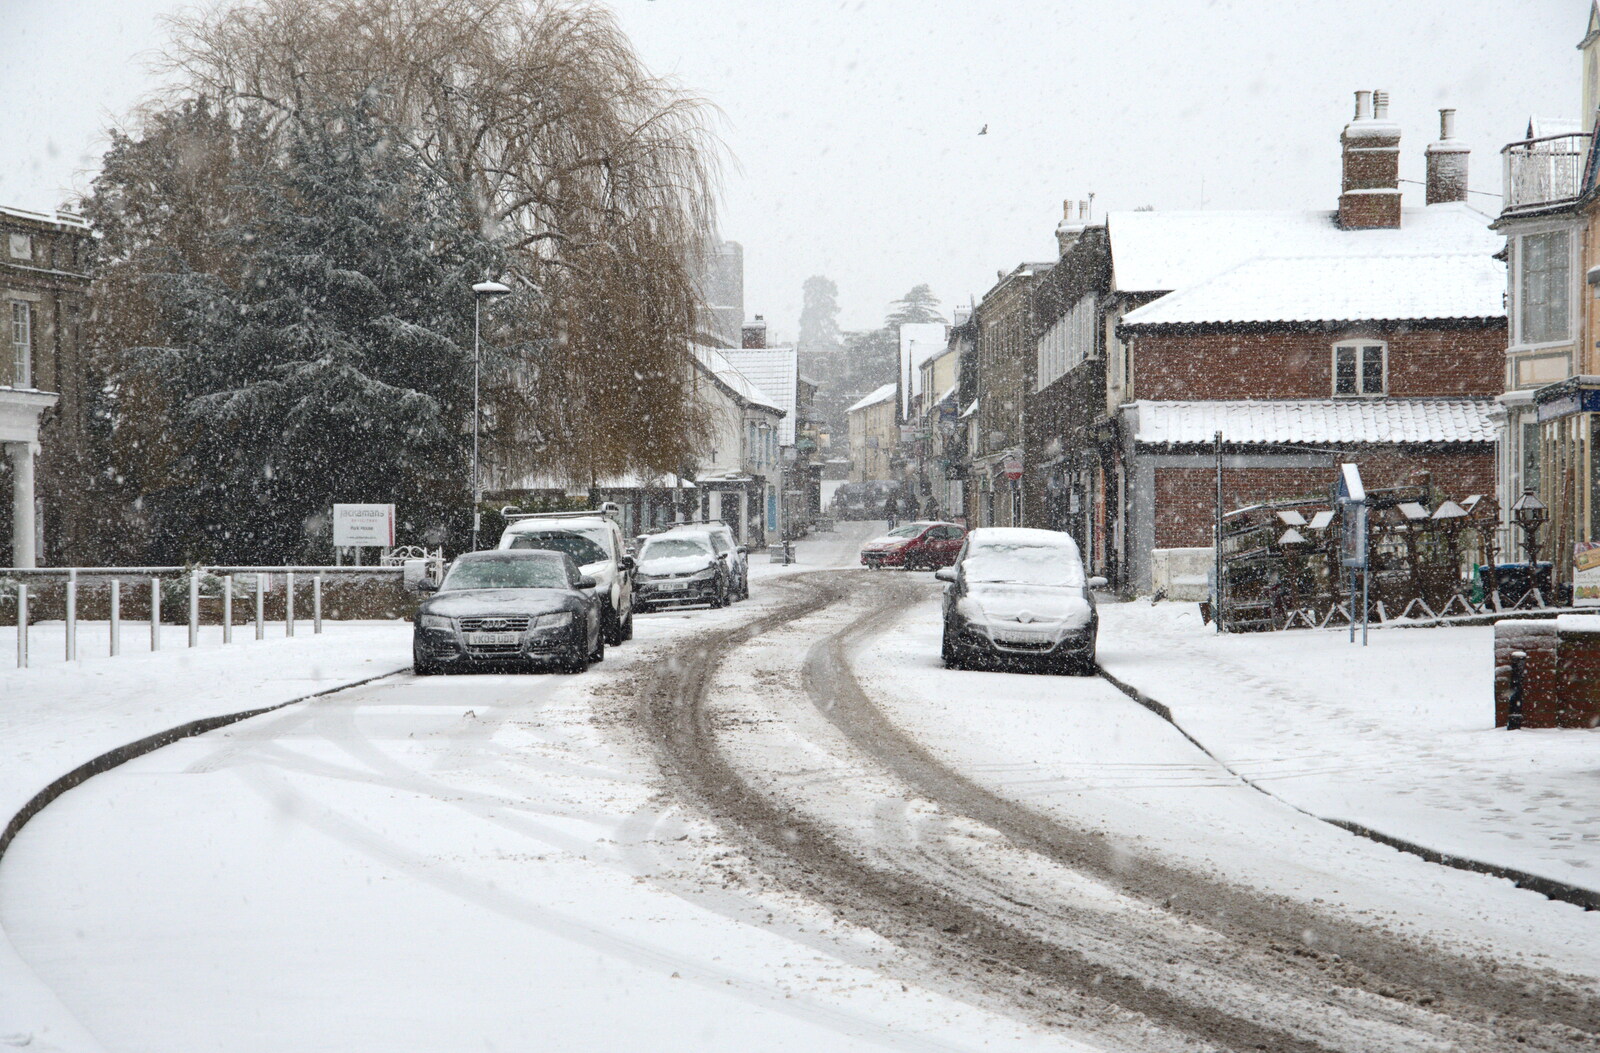 Mere Street is empty and snowy from A Snowy Morning, Diss, Norfolk - 16th January 2021